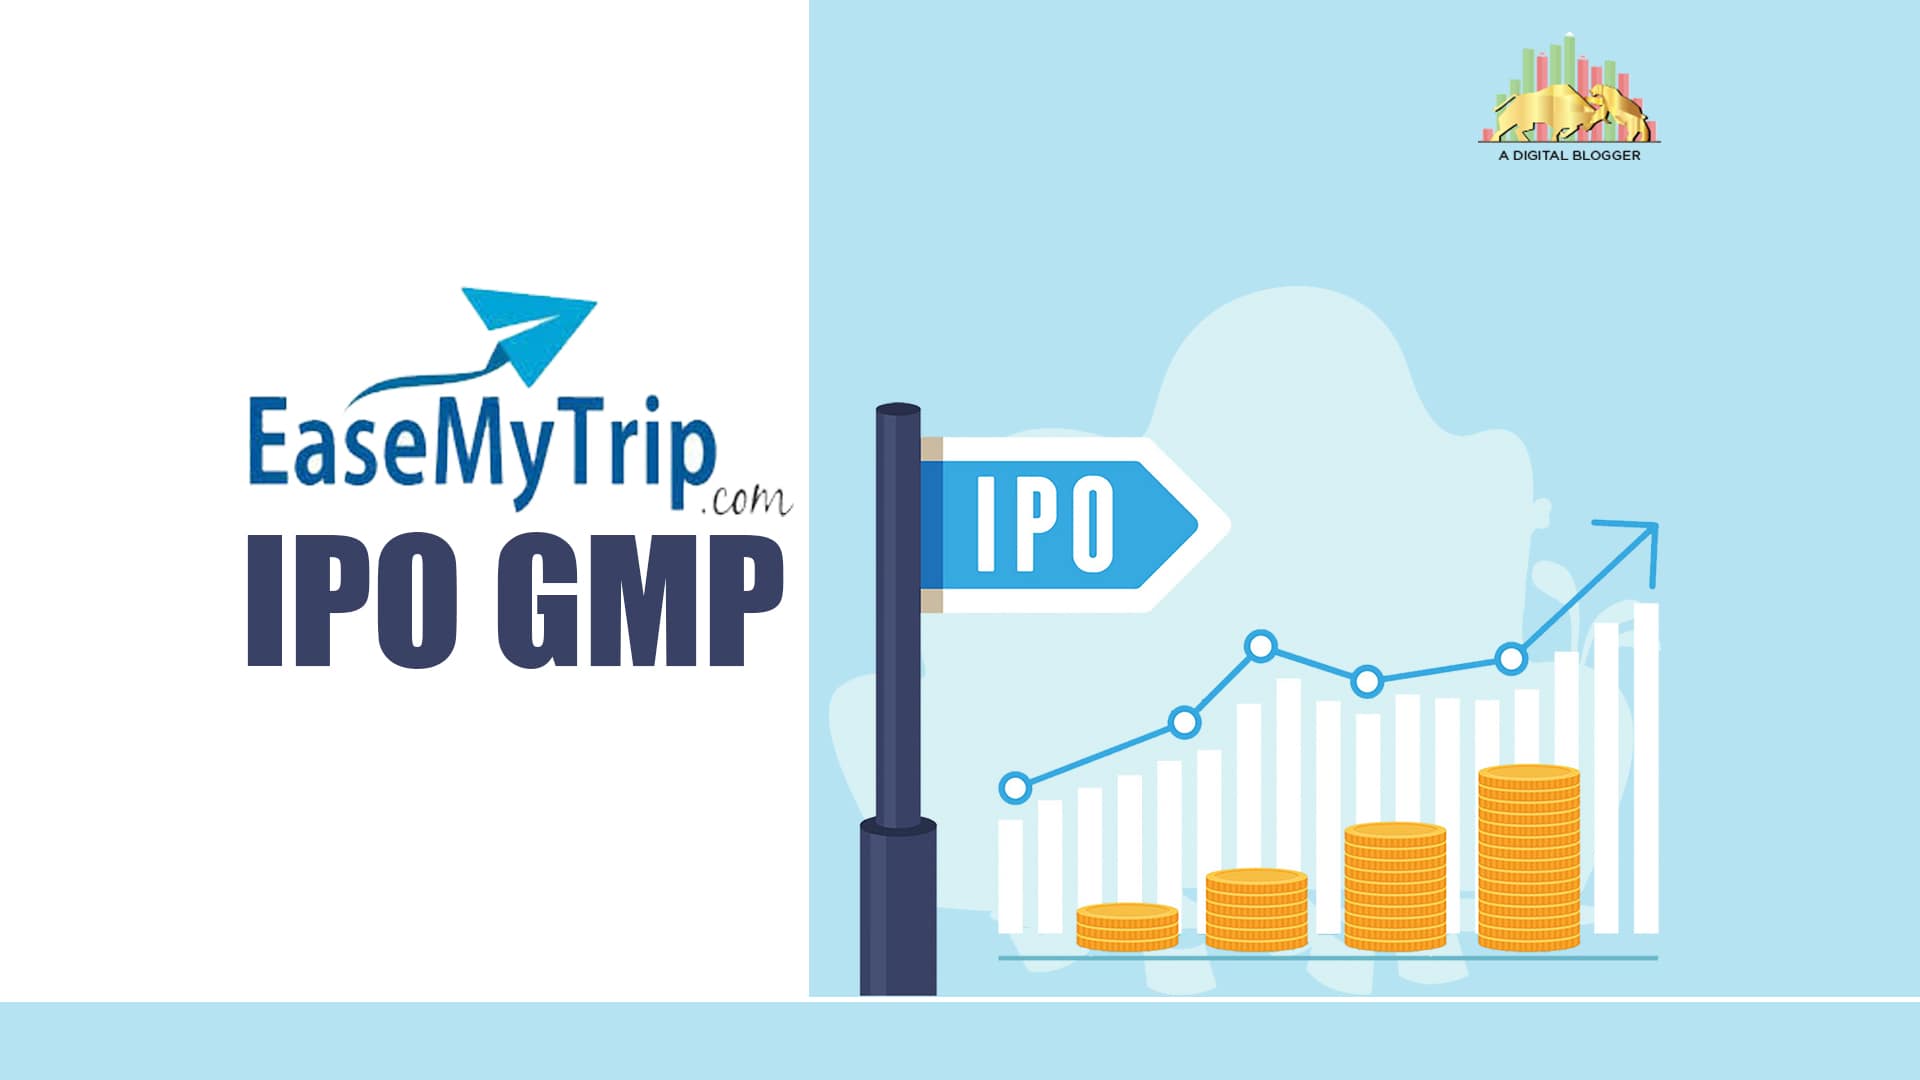 easy my trip ipo price